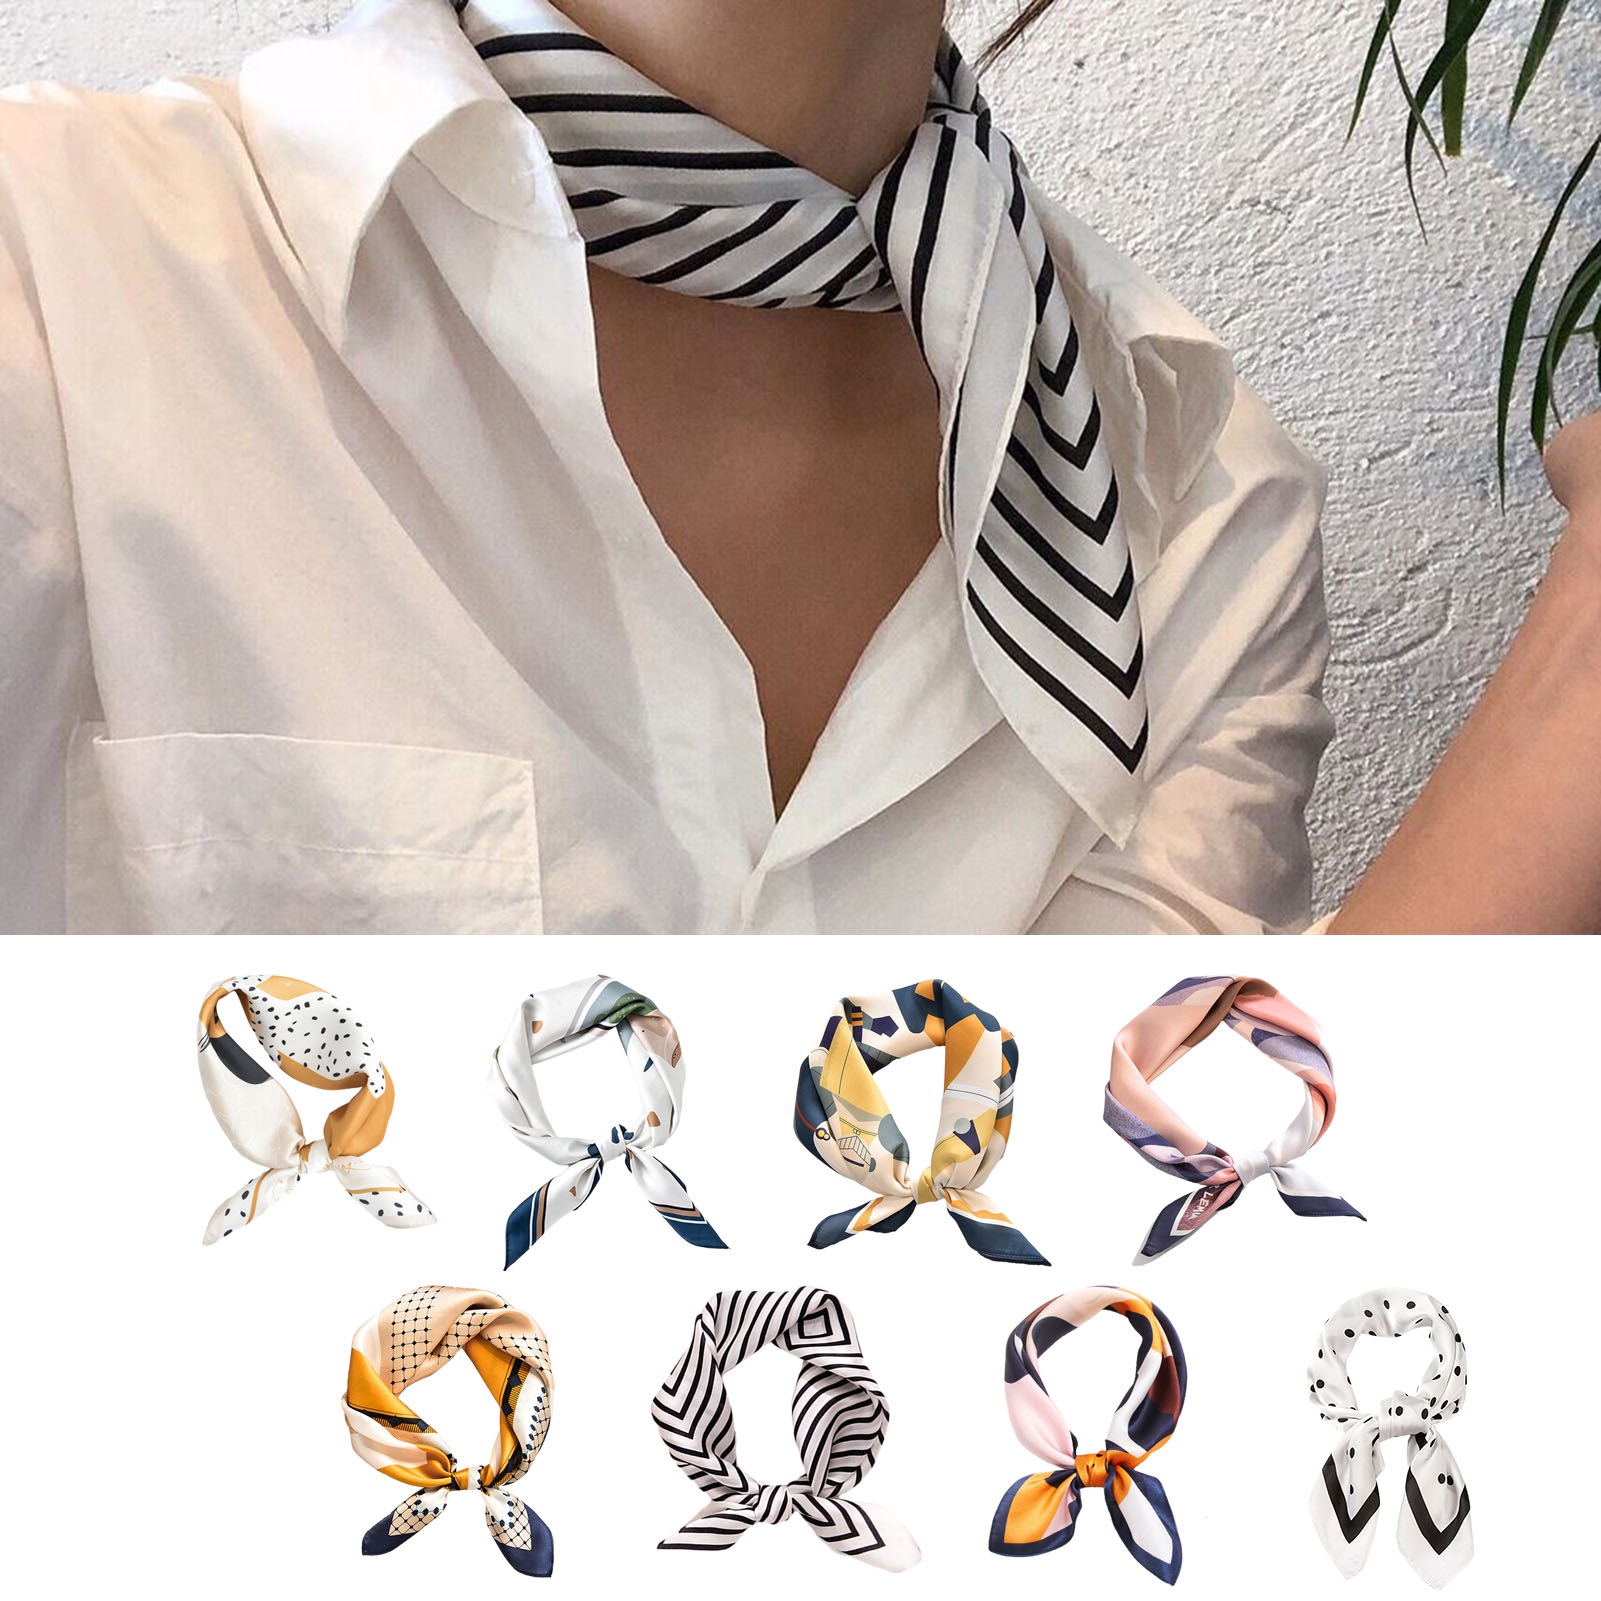 NUZYZ Silk Scarf for Women Soft Breathable Fashionable Neck Collar with ...